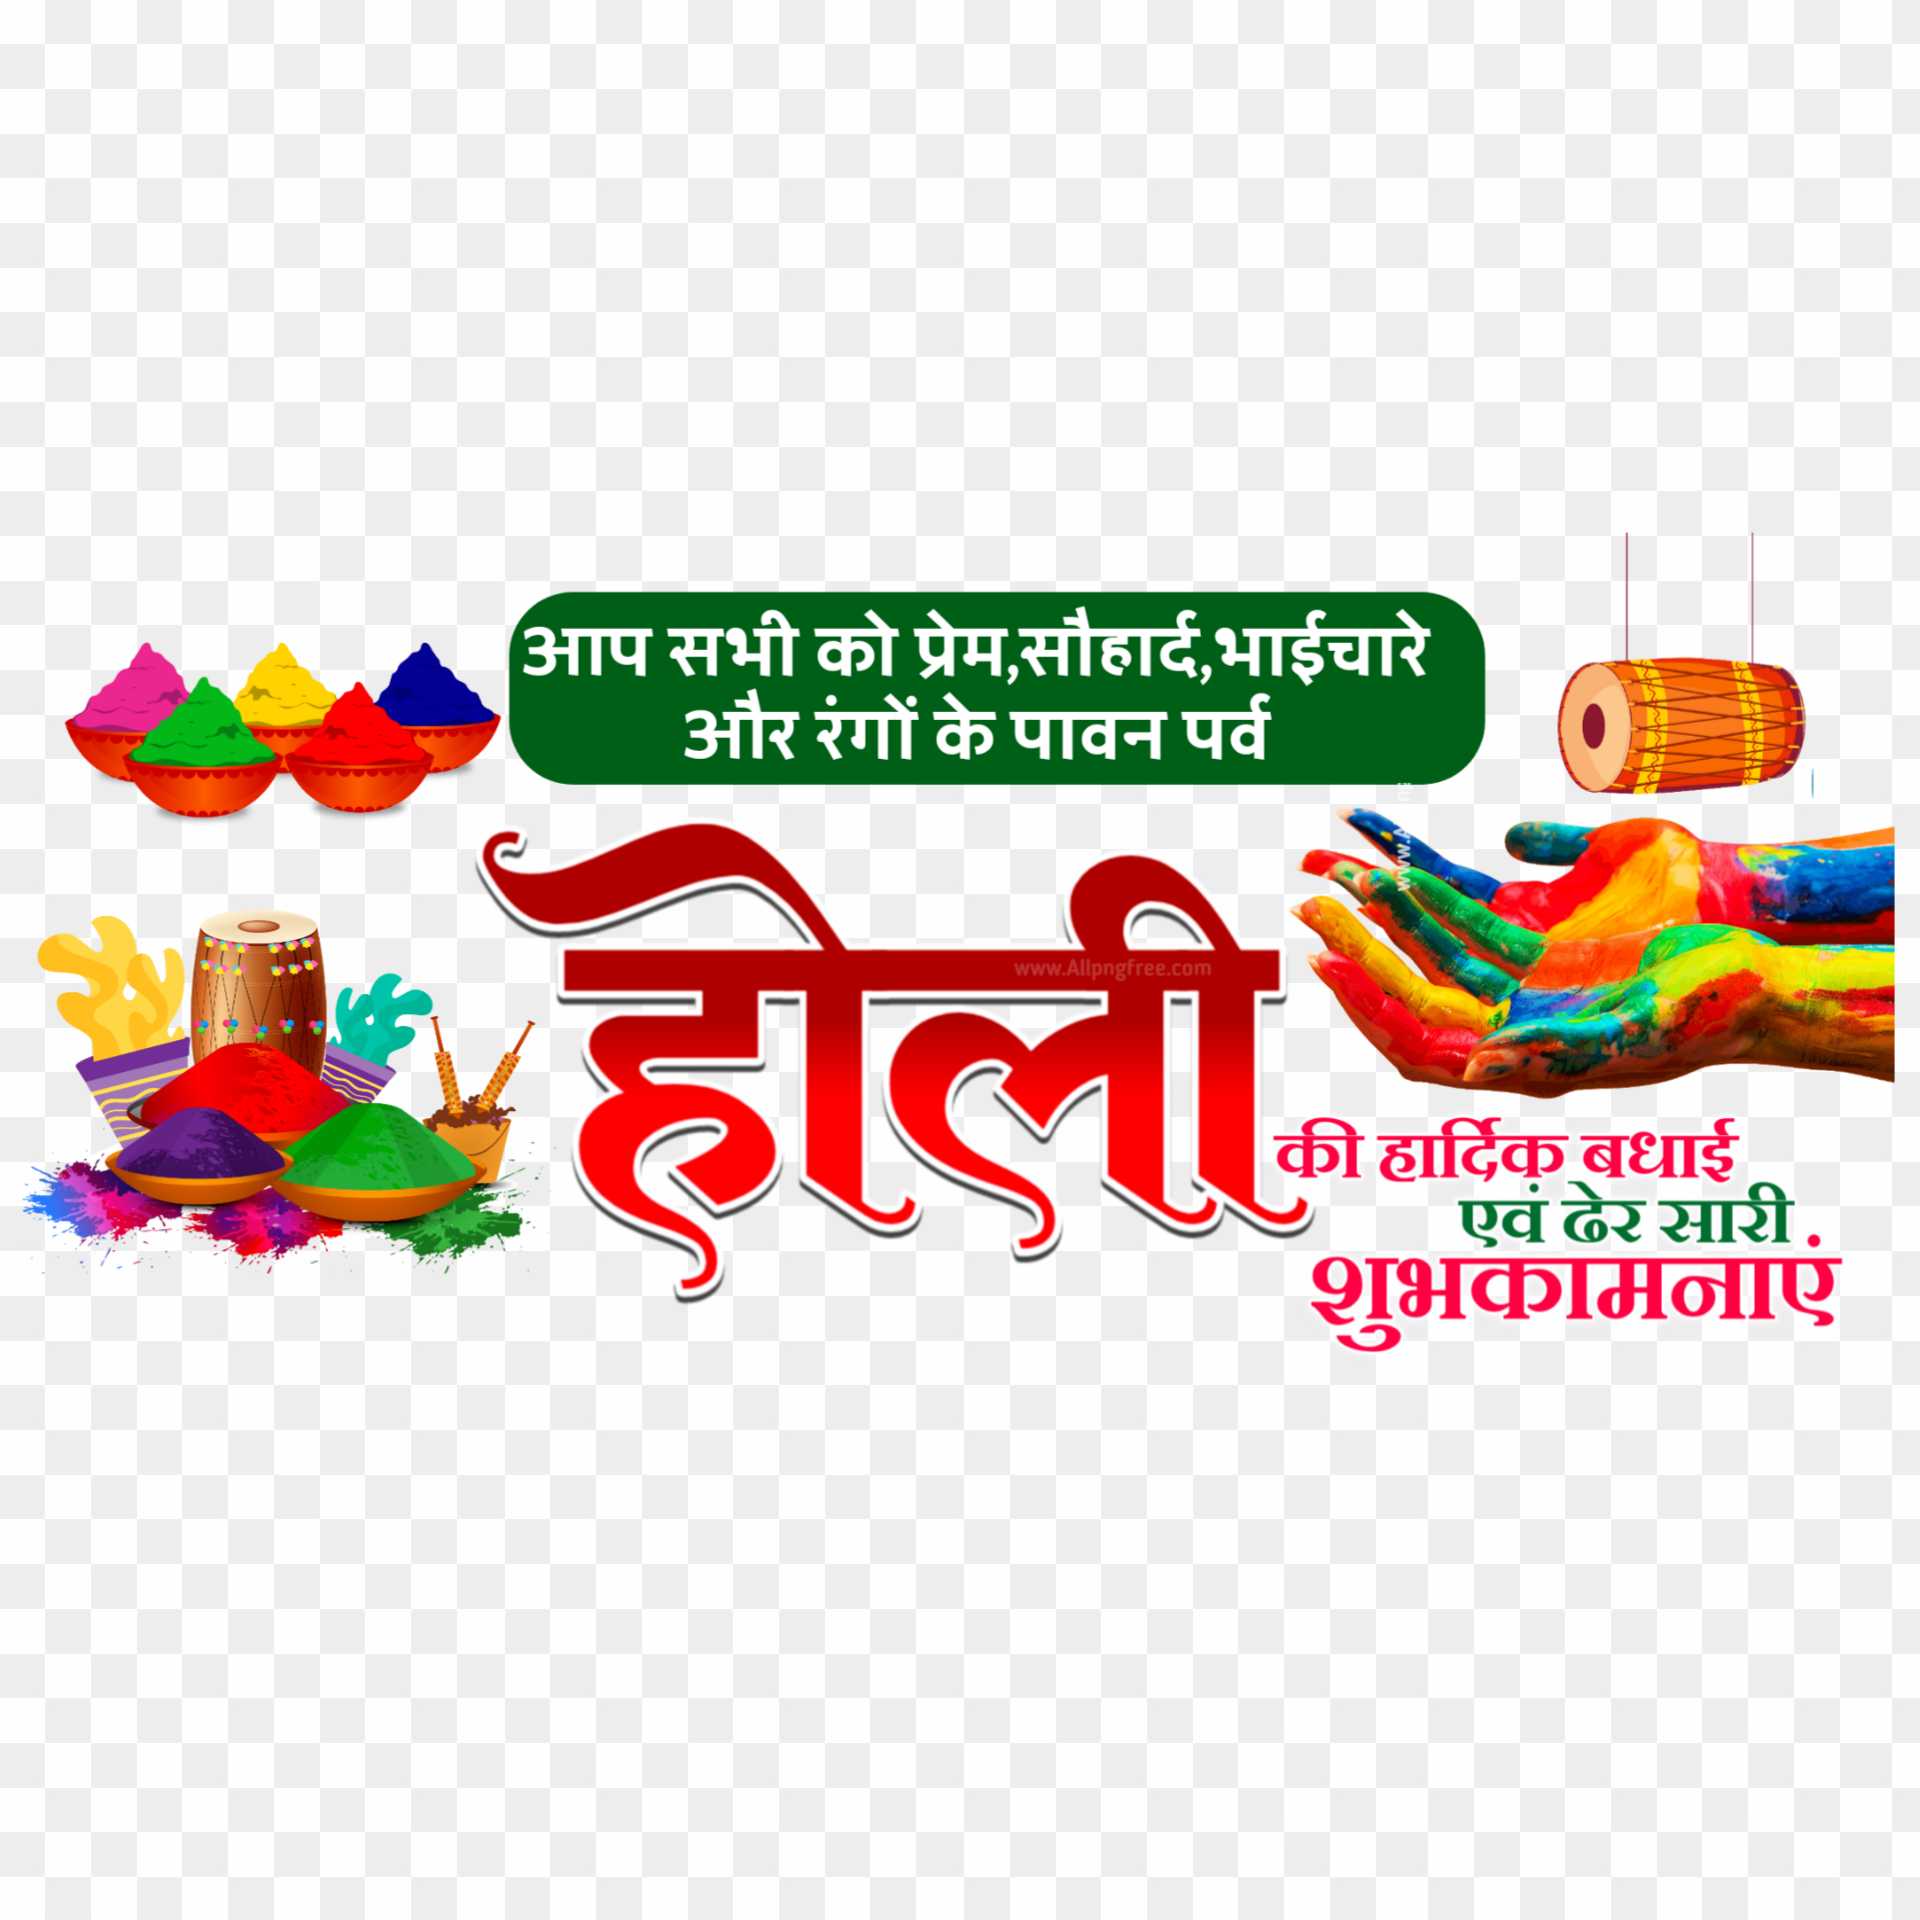 Holi group banner editing PNG download